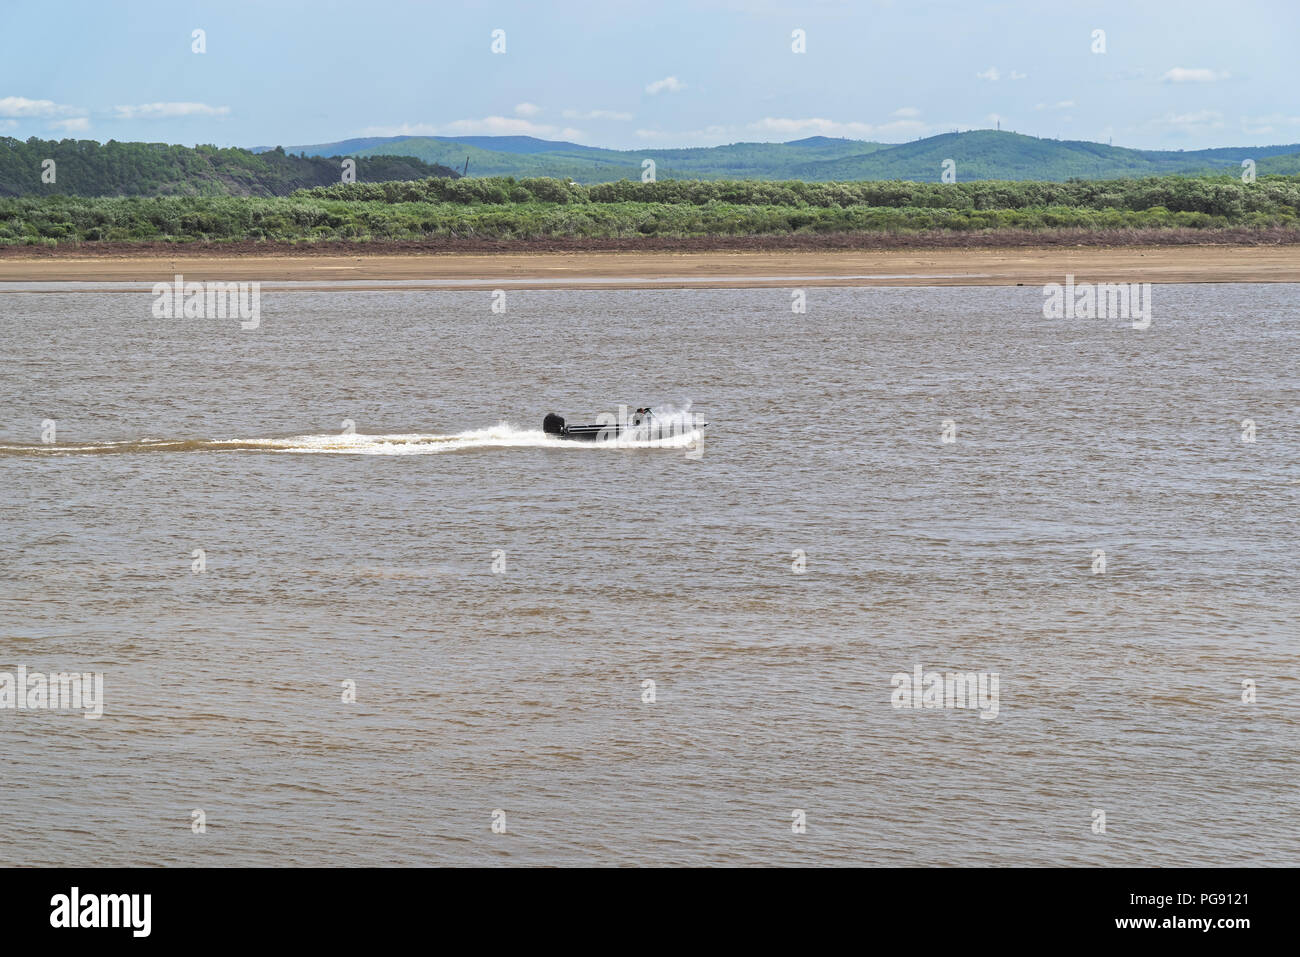 Scenic view of a motorboat on Amur river against blue sky, Komsomolsk-on-Amur, Russia Stock Photo